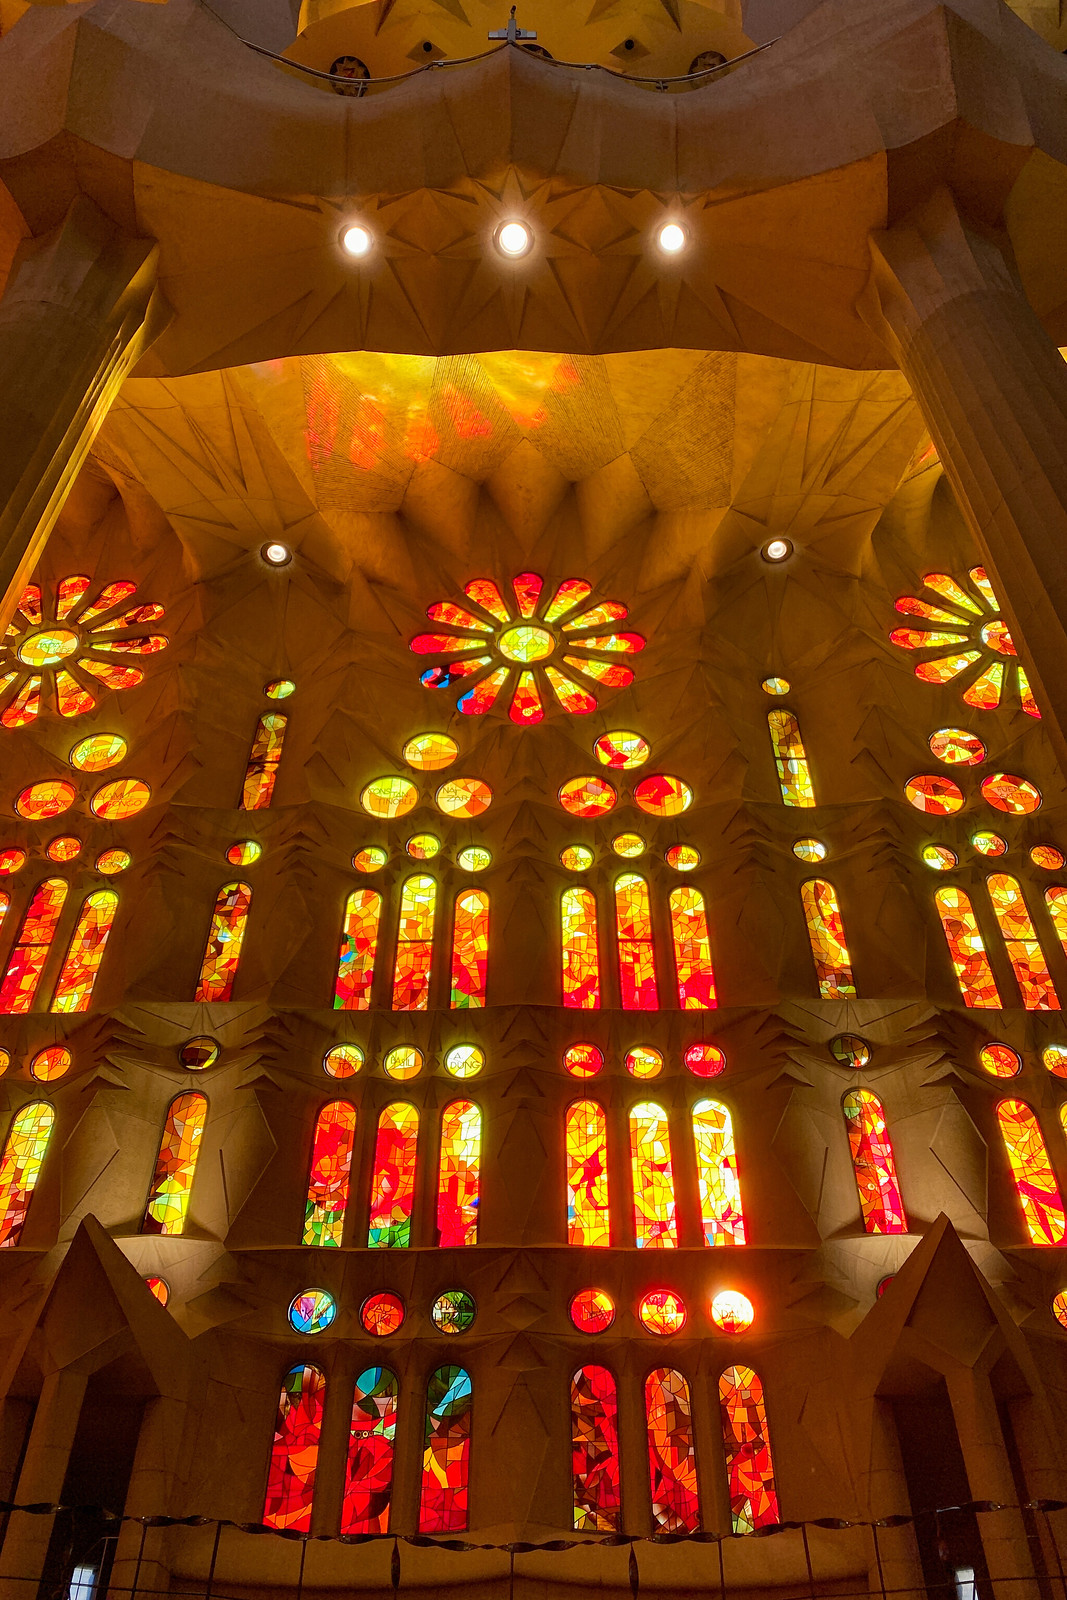 Basilica de la Sagrada Familia | Photos to Inspire You to Visit Spain | European Vacation Inspiration | Spain Travel | Spain Aesthetics | Spain Aesthetic | Most Beautiful Places in Spain | Best Places to Visit in Spain | Famous Barcelona Landmarks | Historical Sites of Barcelona